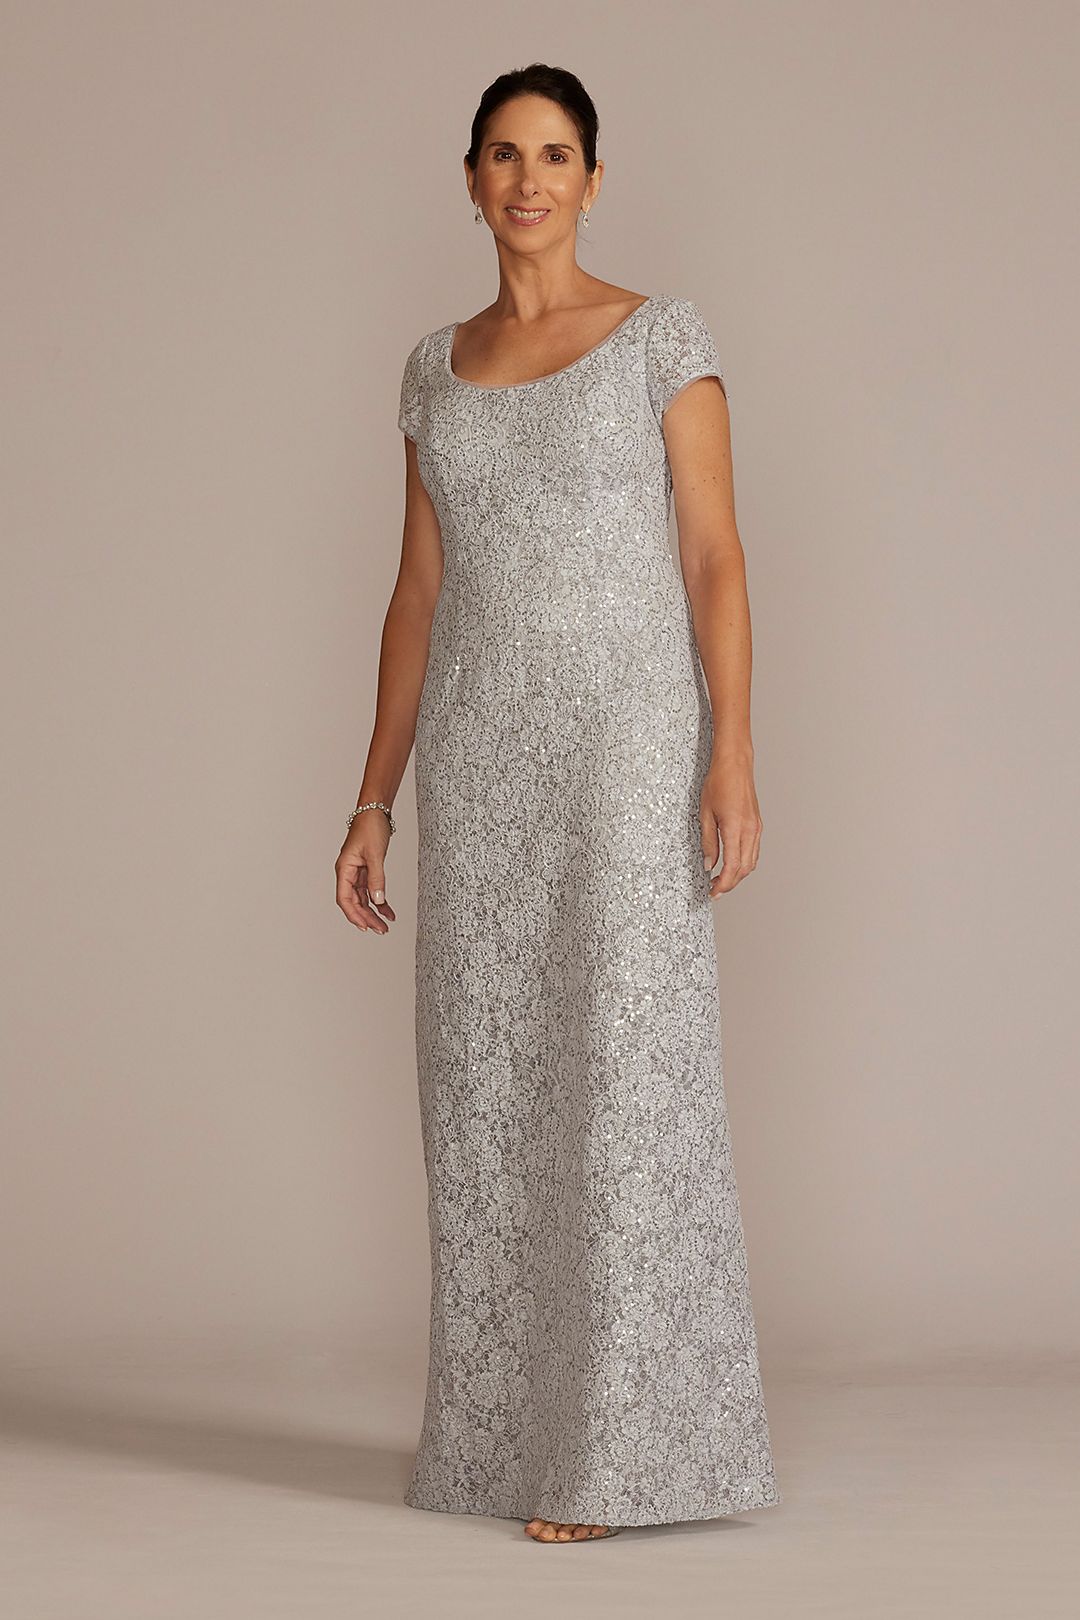 Short Sleeve Sequin Lace Sheath Gown Image 1